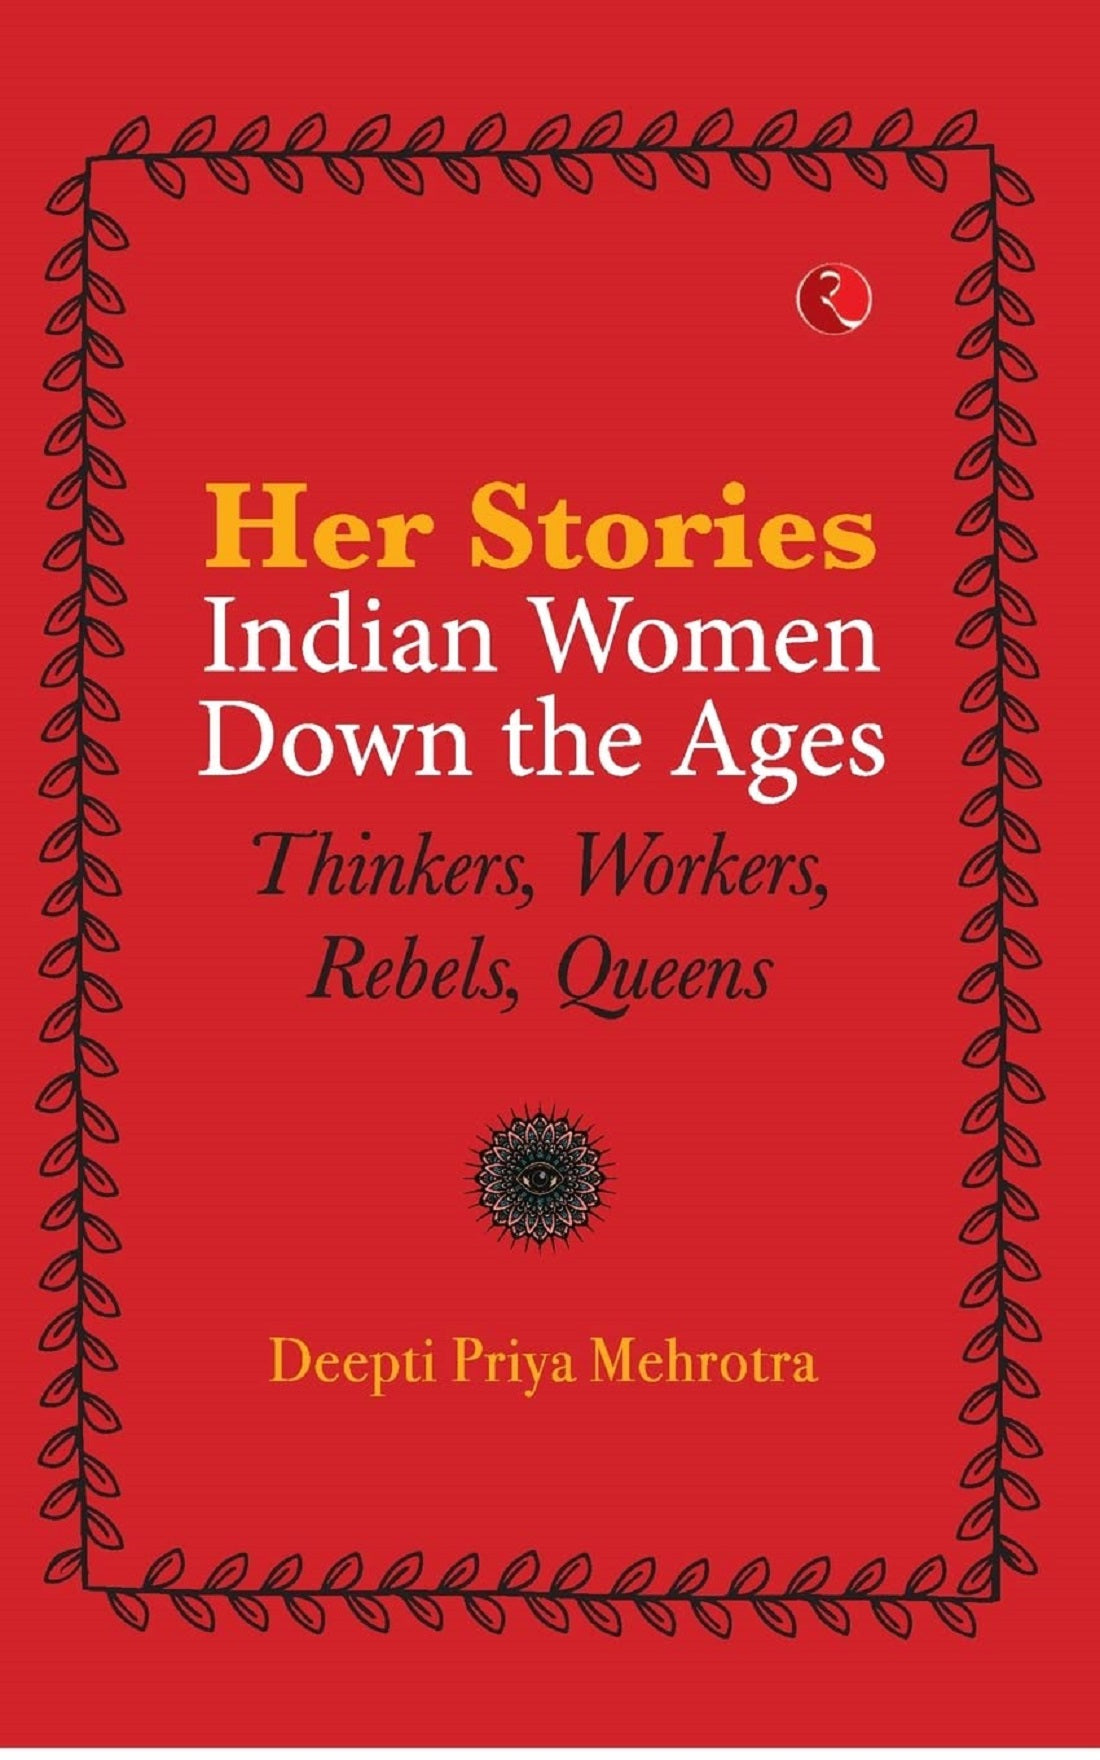 HER STORIES INDIAN WOMEN DOWN THE AGES